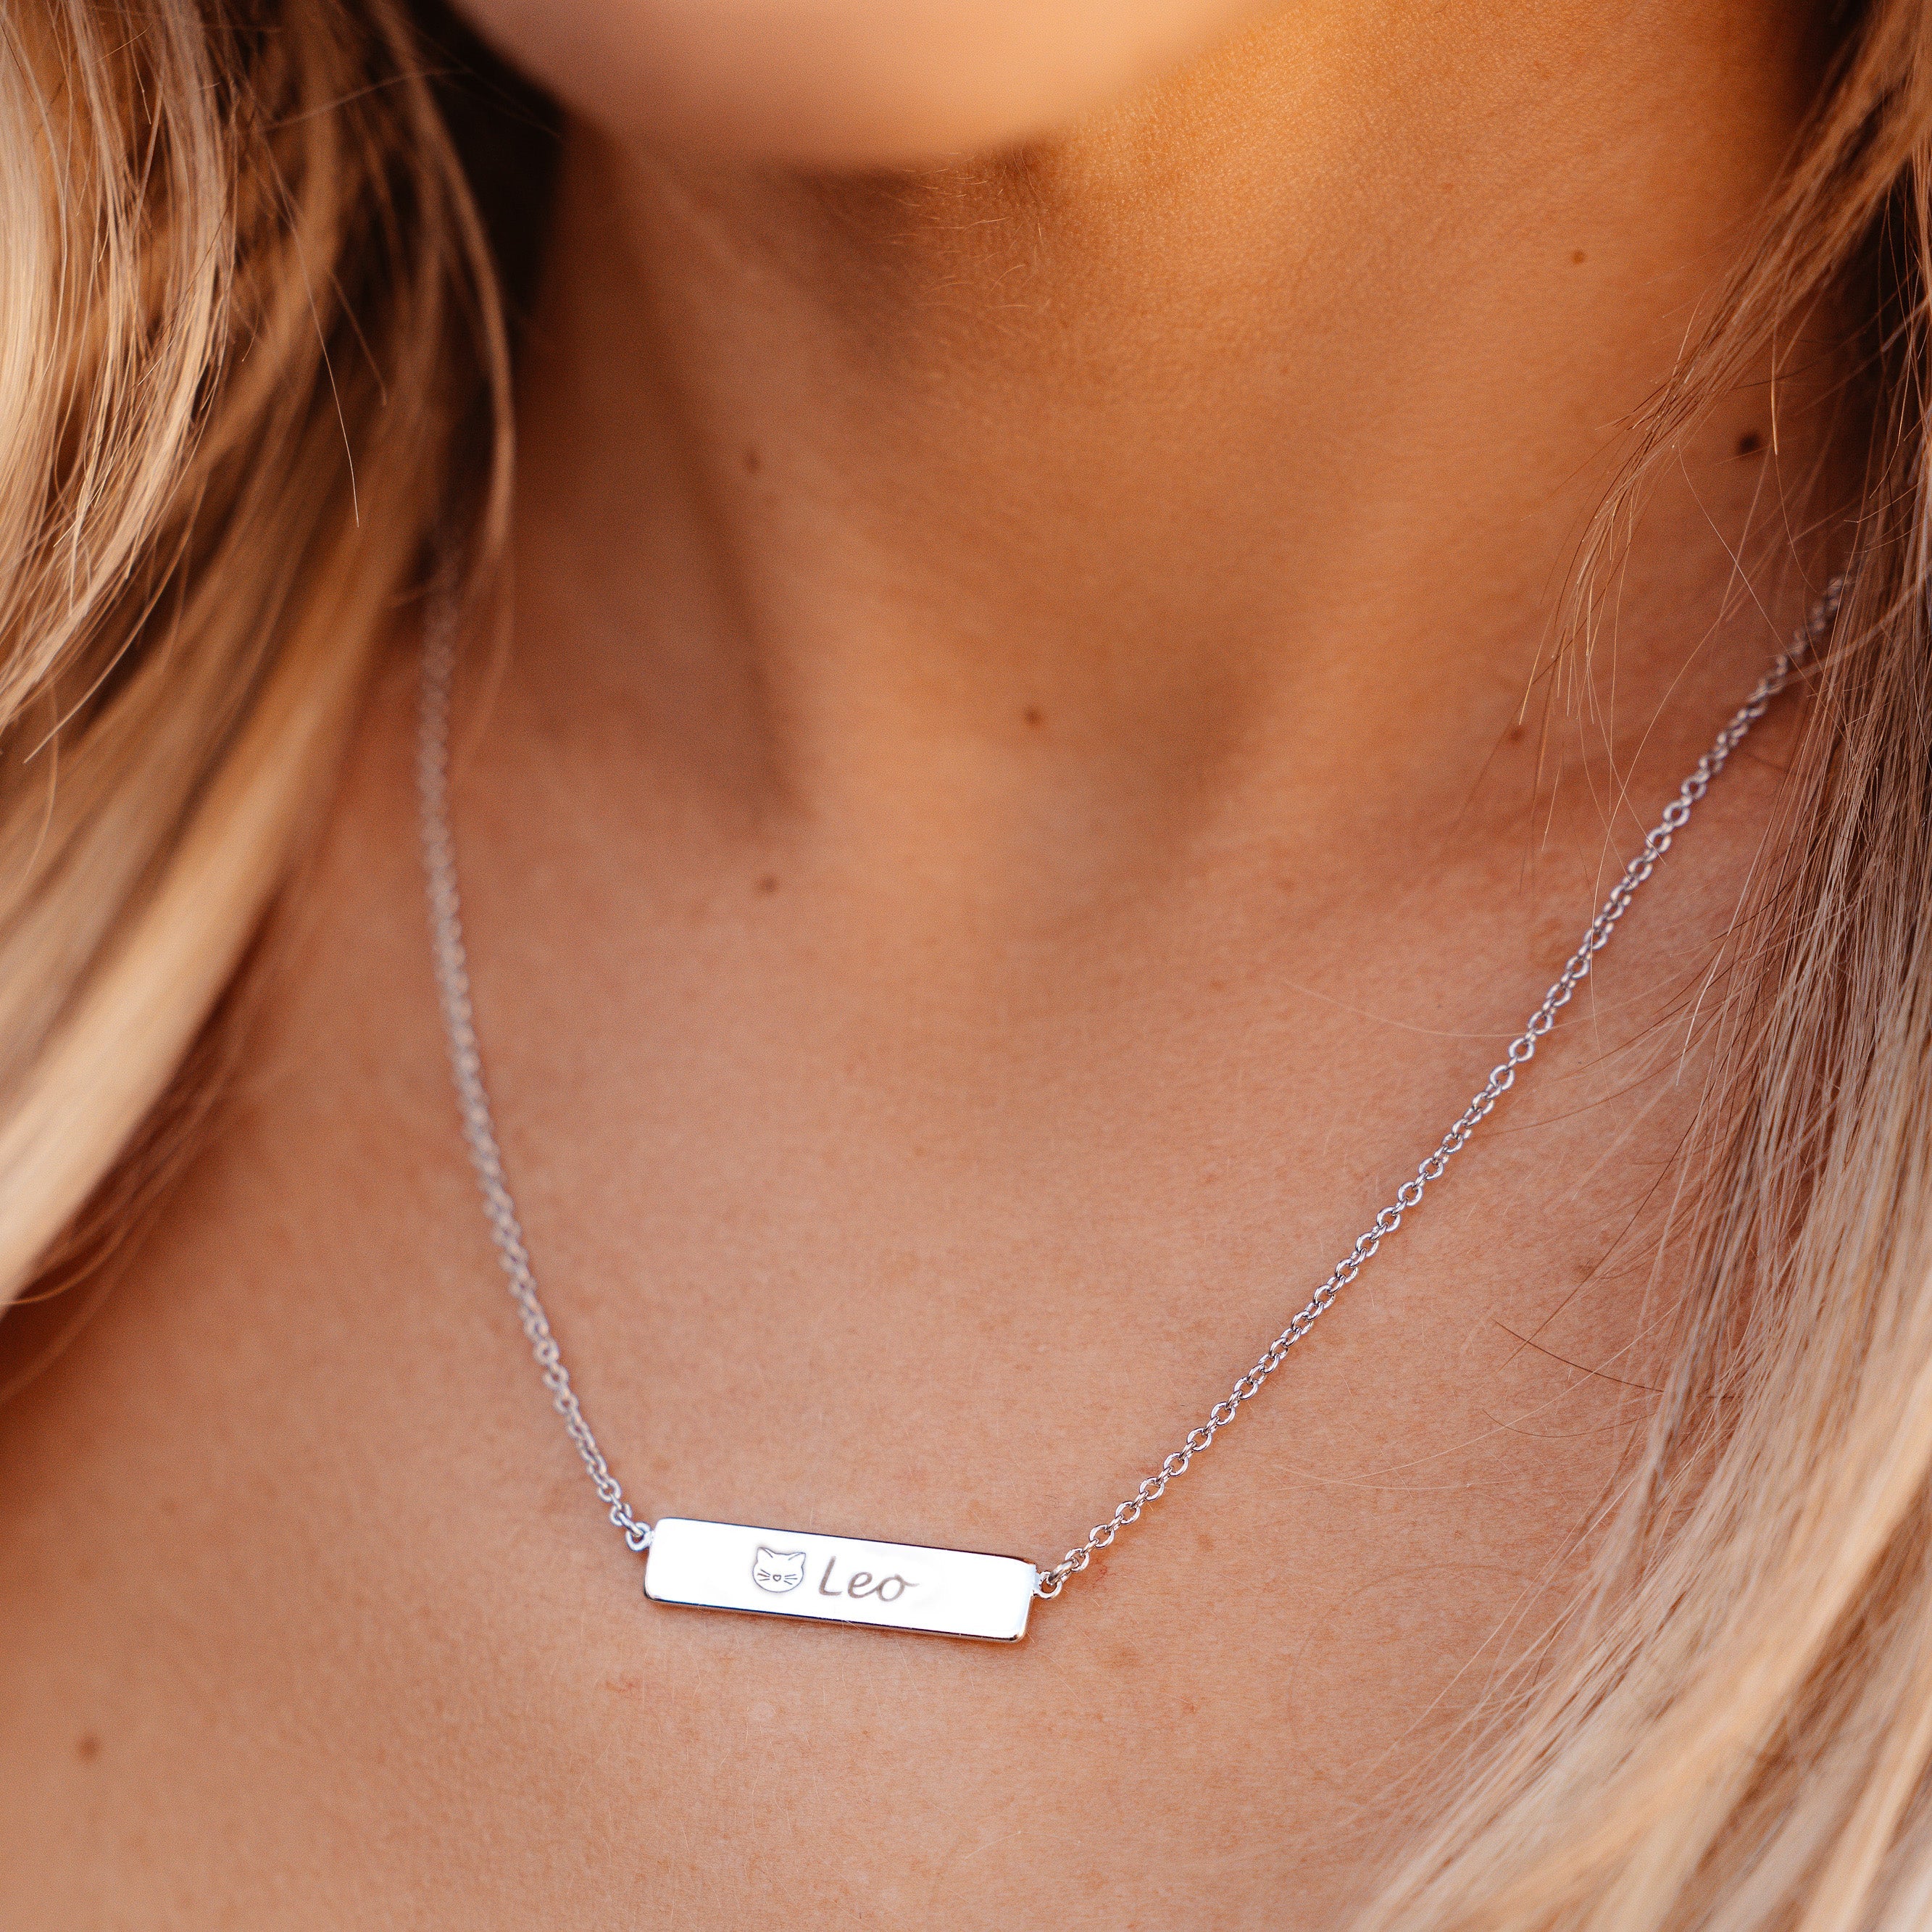 Buy Personalized Name Necklace with Bar Pendant and Adjustable Chain -  Cuboid Customized Name Necklace Man and Women's Design - Couple's Necklace  (Black) at Amazon.in